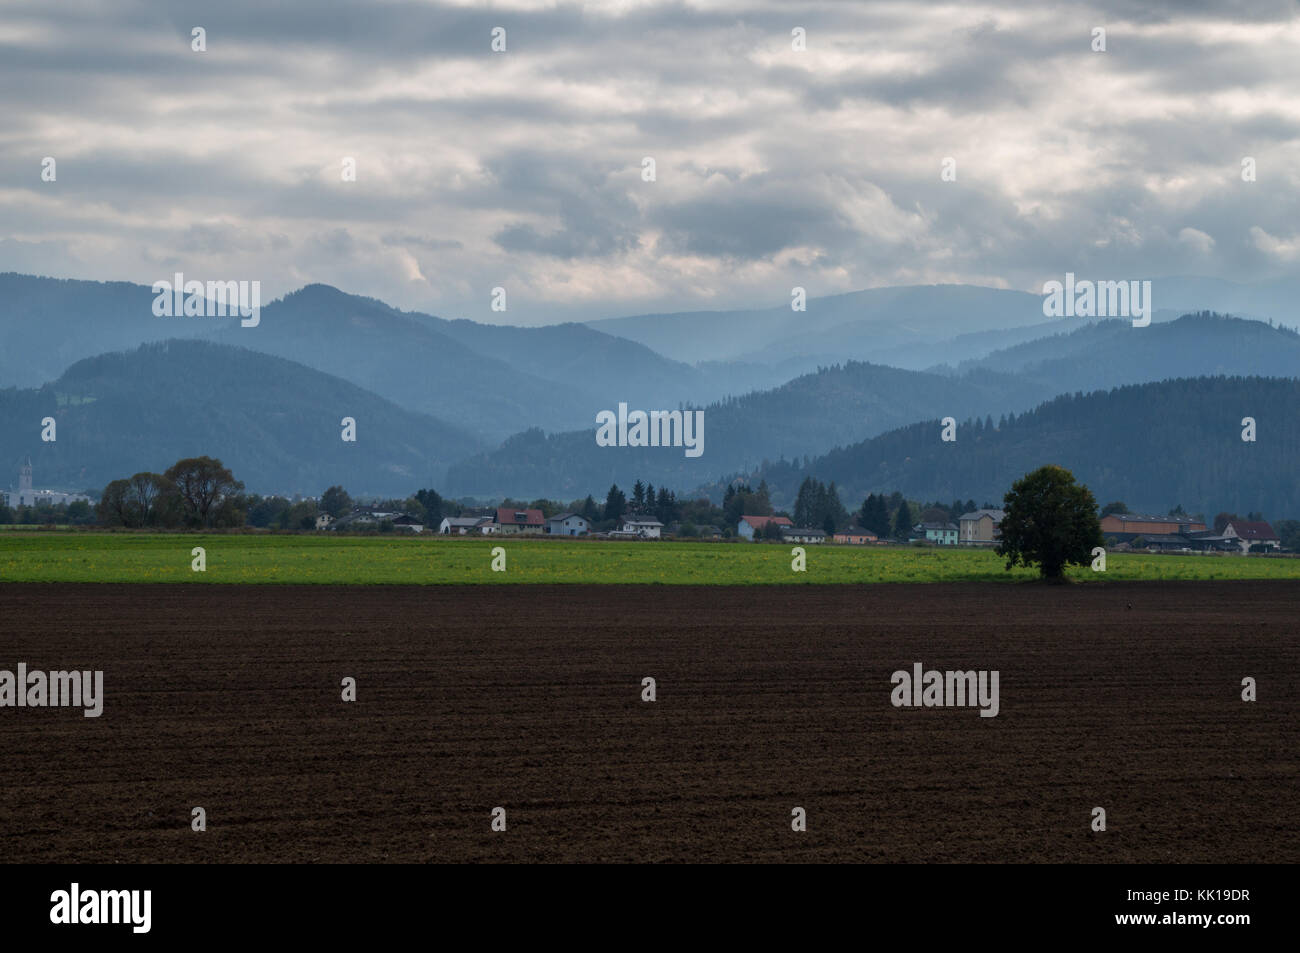 The farmlands of the Mur river valley and the mountains in the background Stock Photo